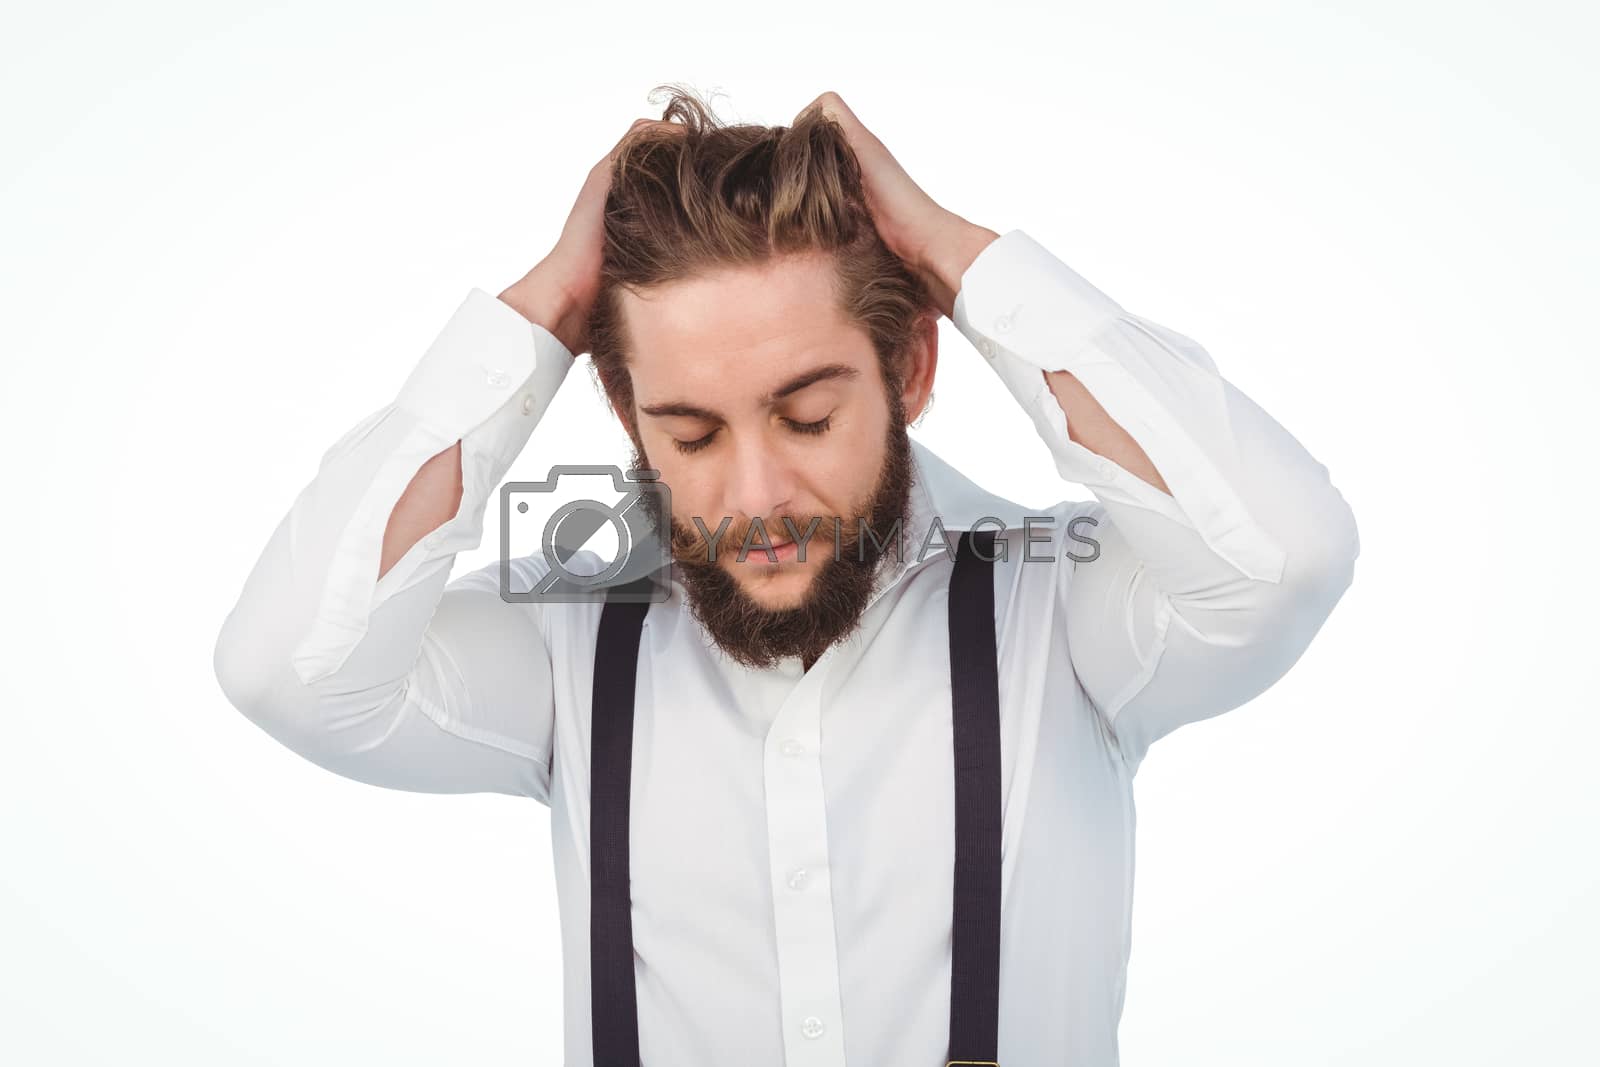 Royalty free image of Frustrated hipster with head in hands by Wavebreakmedia